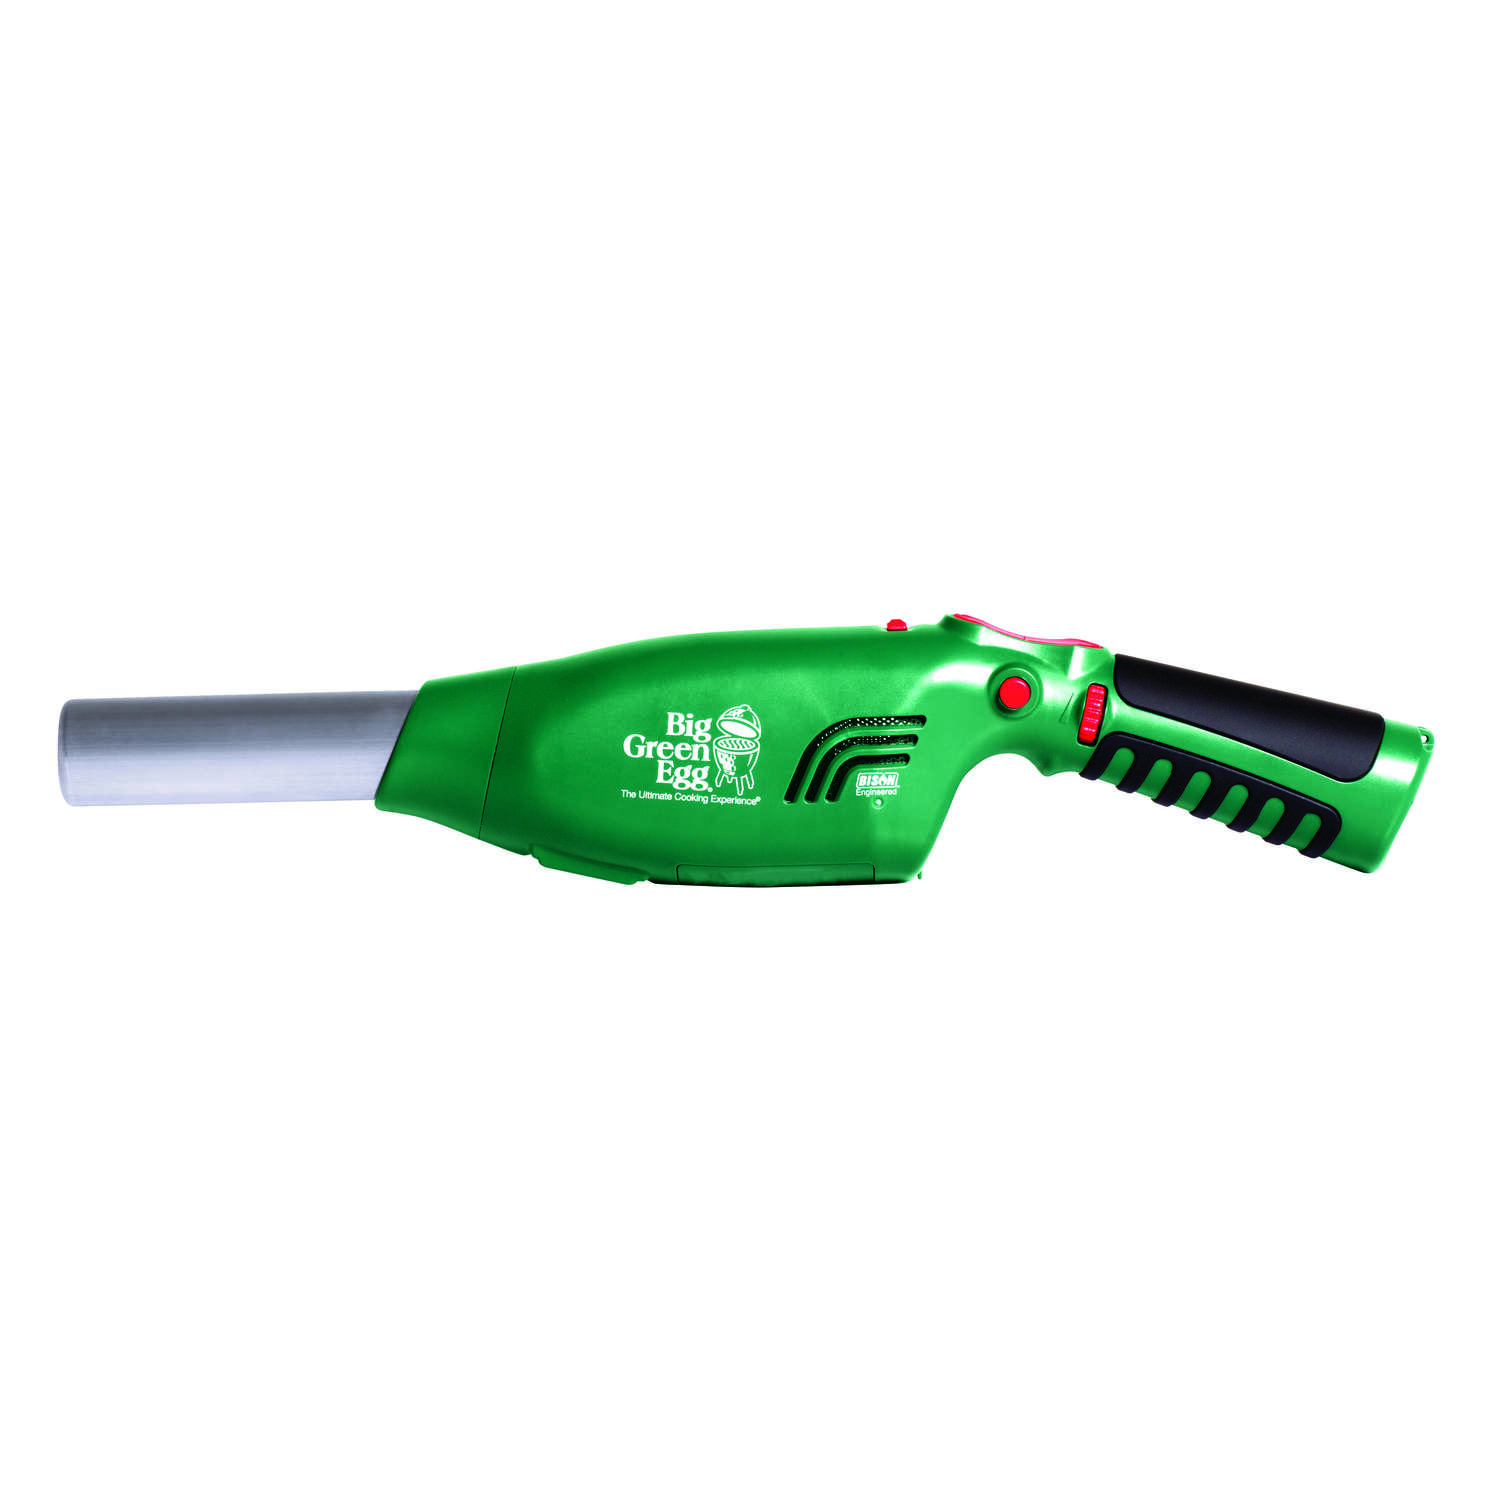 “bison airlighter 520 refillable butane firestarter, with rechargeable batteries, an led light and a folding handle” product image